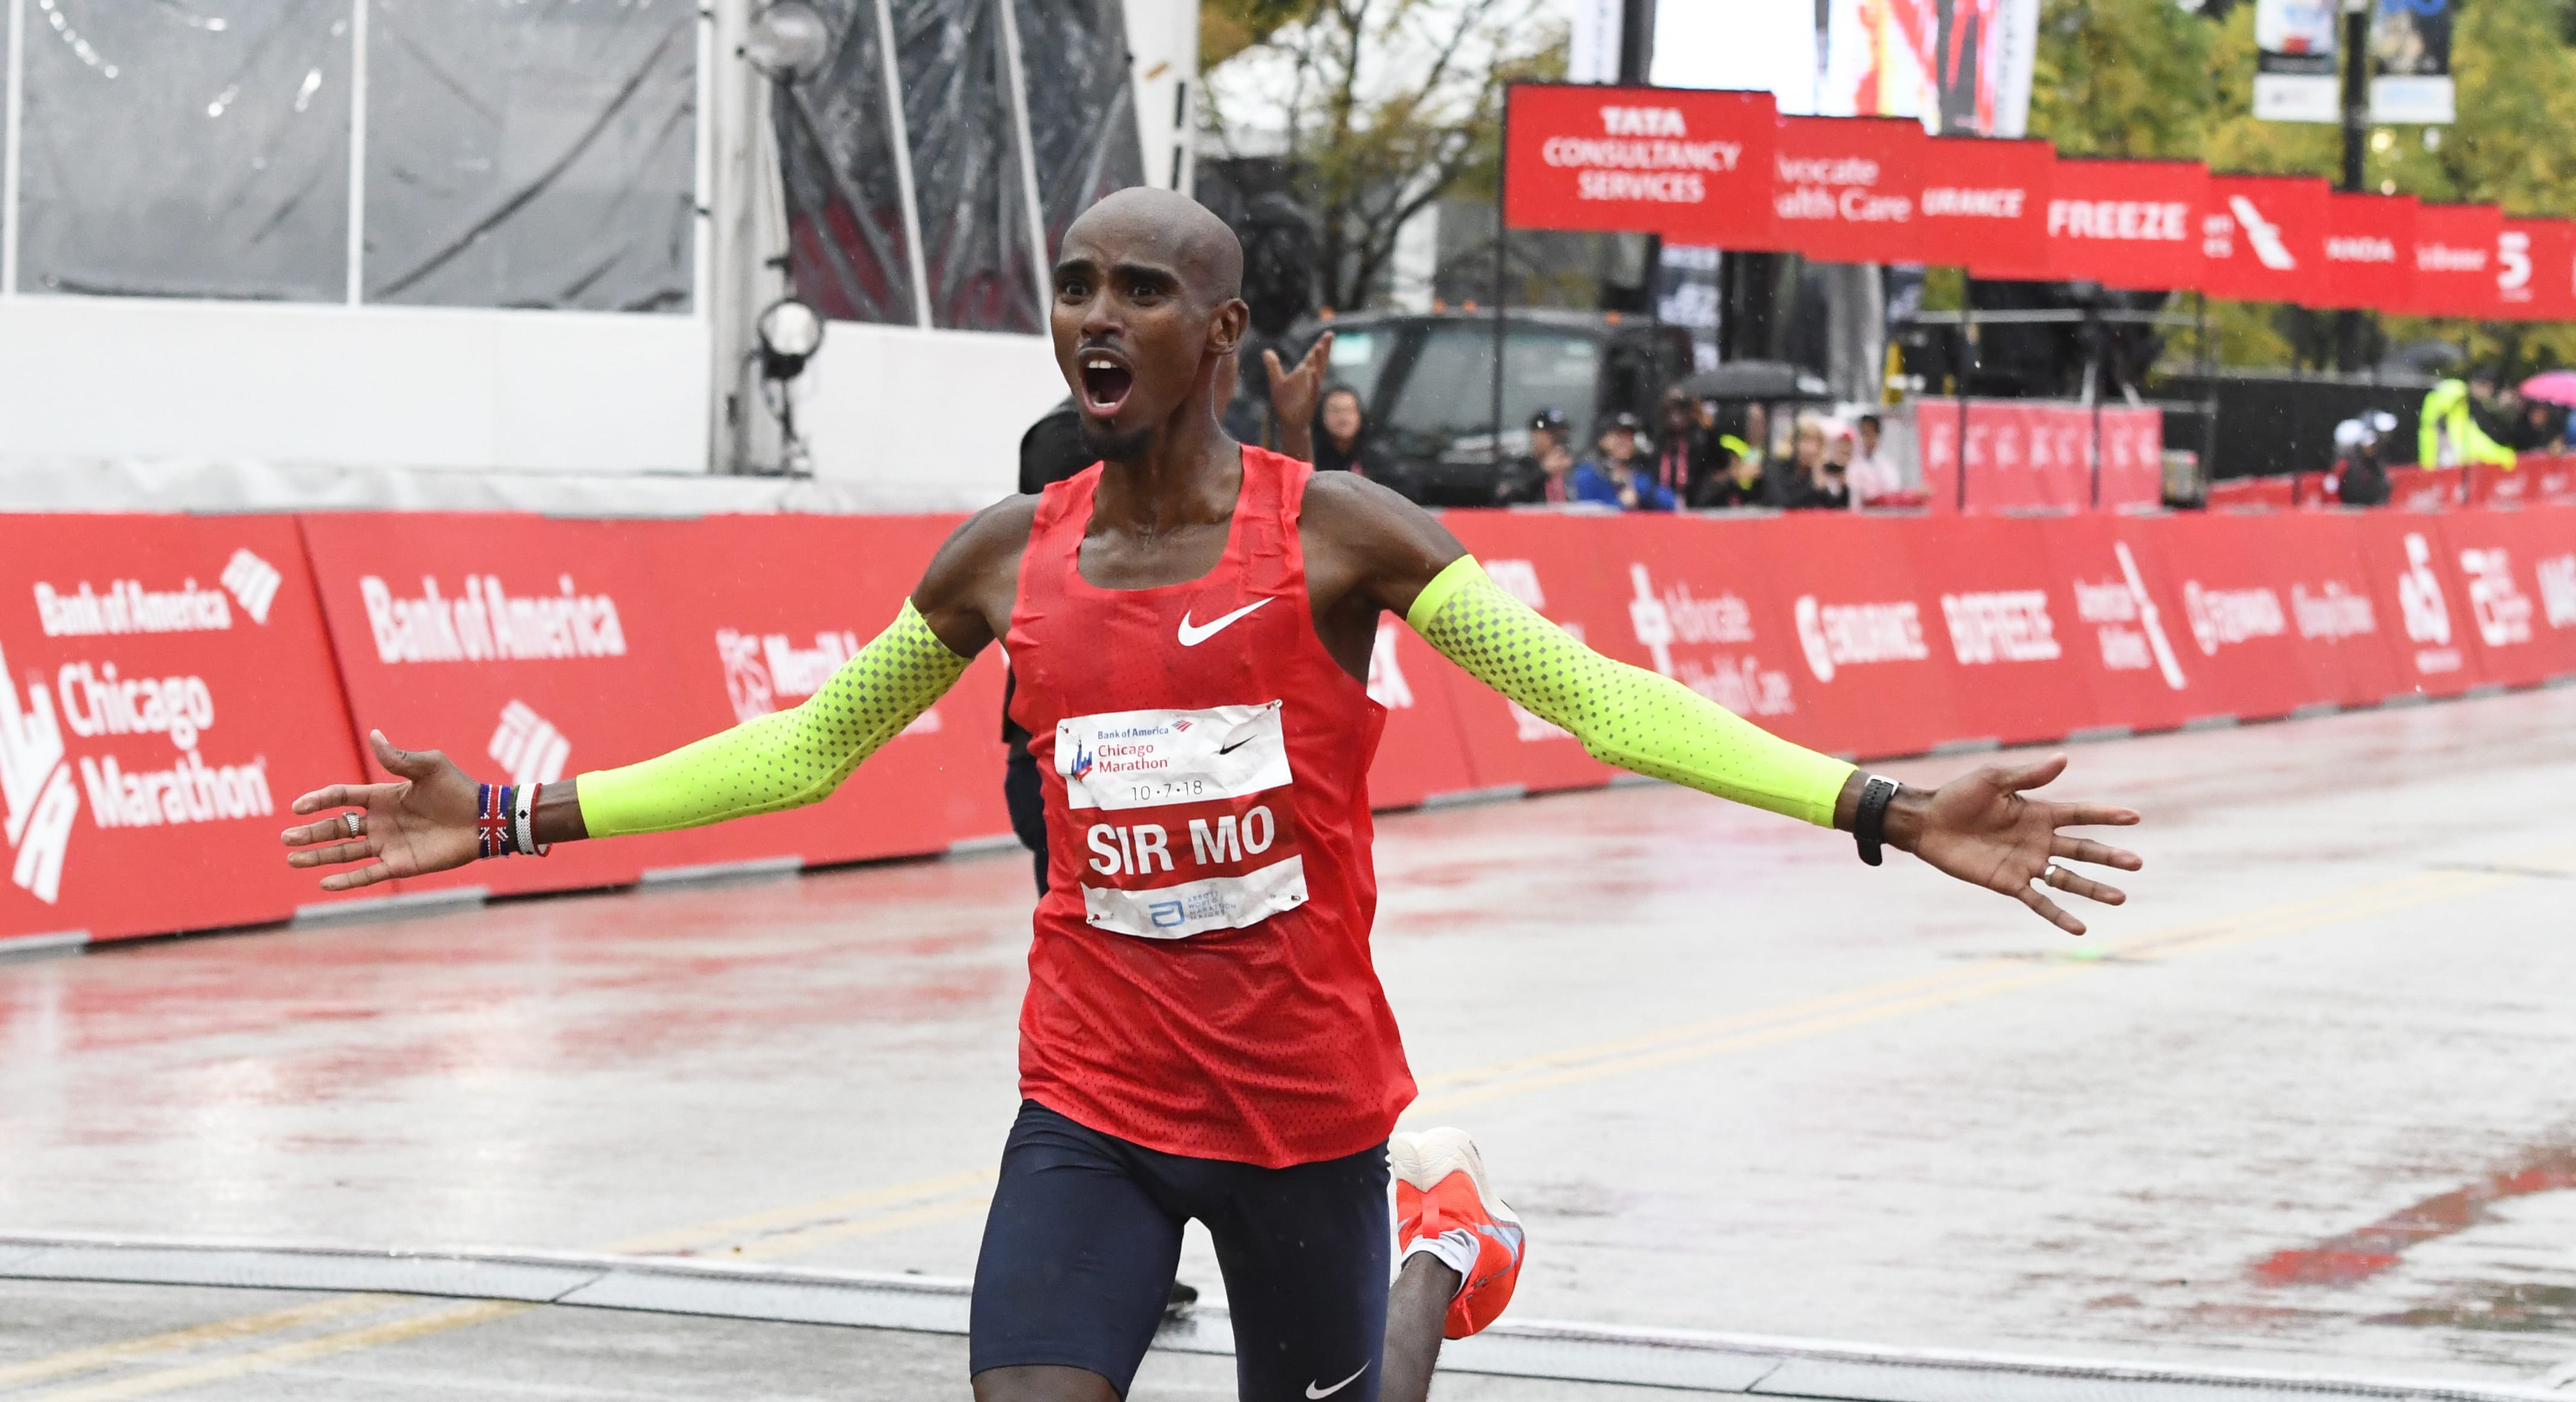 Mo Farah, of Britain, raises his arms after finishing in first place during the Bank of America Chicago Marathon, Sunday, Oct. 7, 2018, in Chicago.